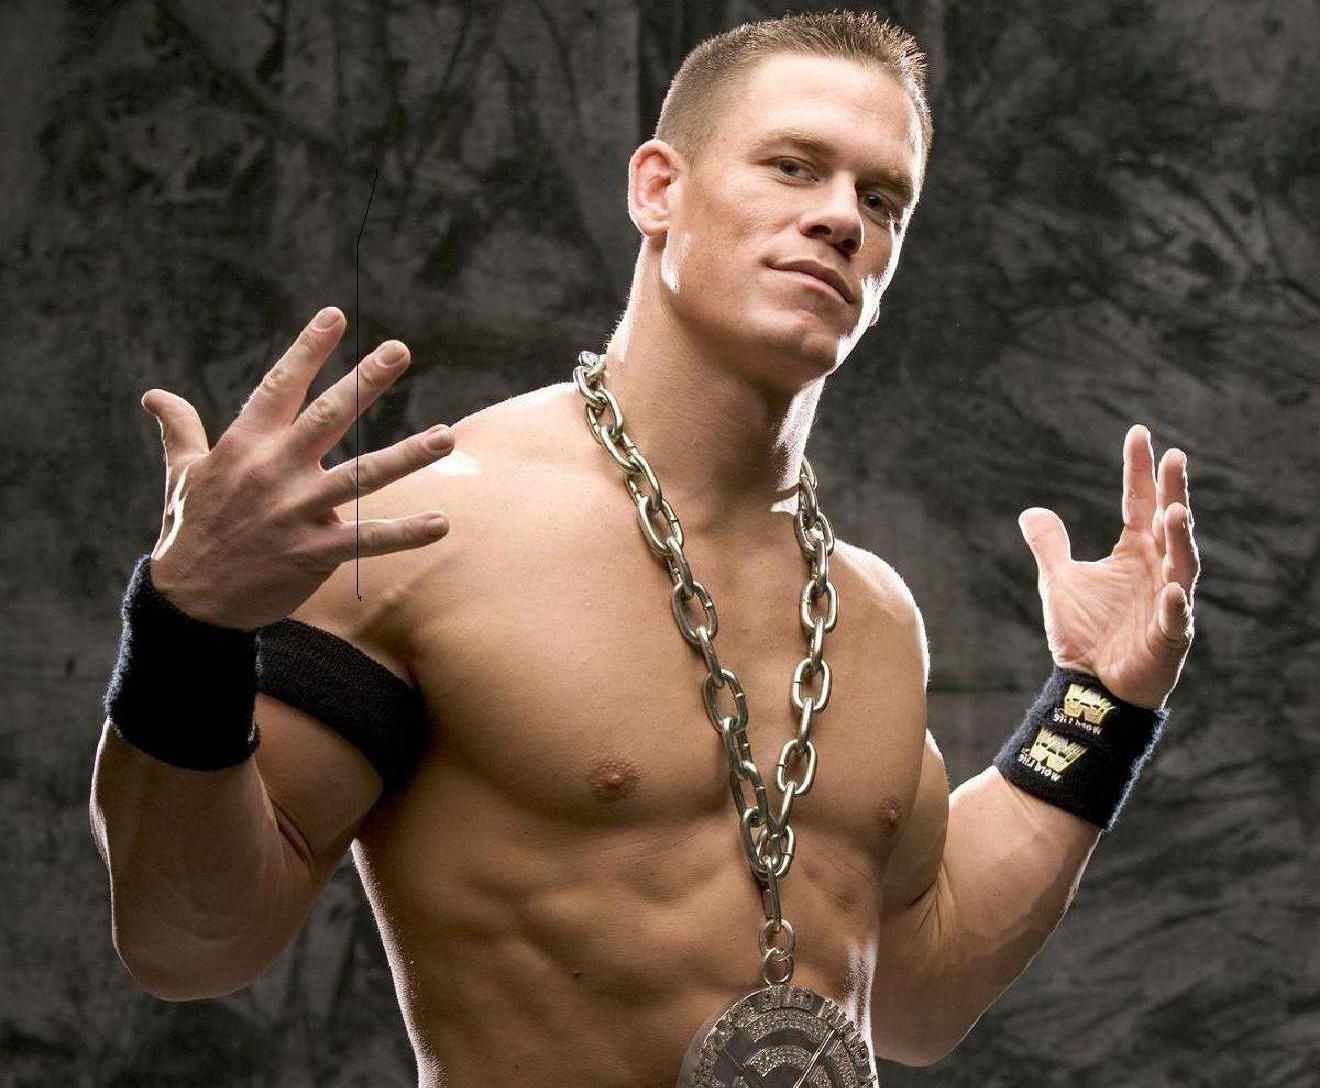 Beautiful John Cena Wallpaper Wallpapers And Pictures - John Cena With Lock Chain - HD Wallpaper 